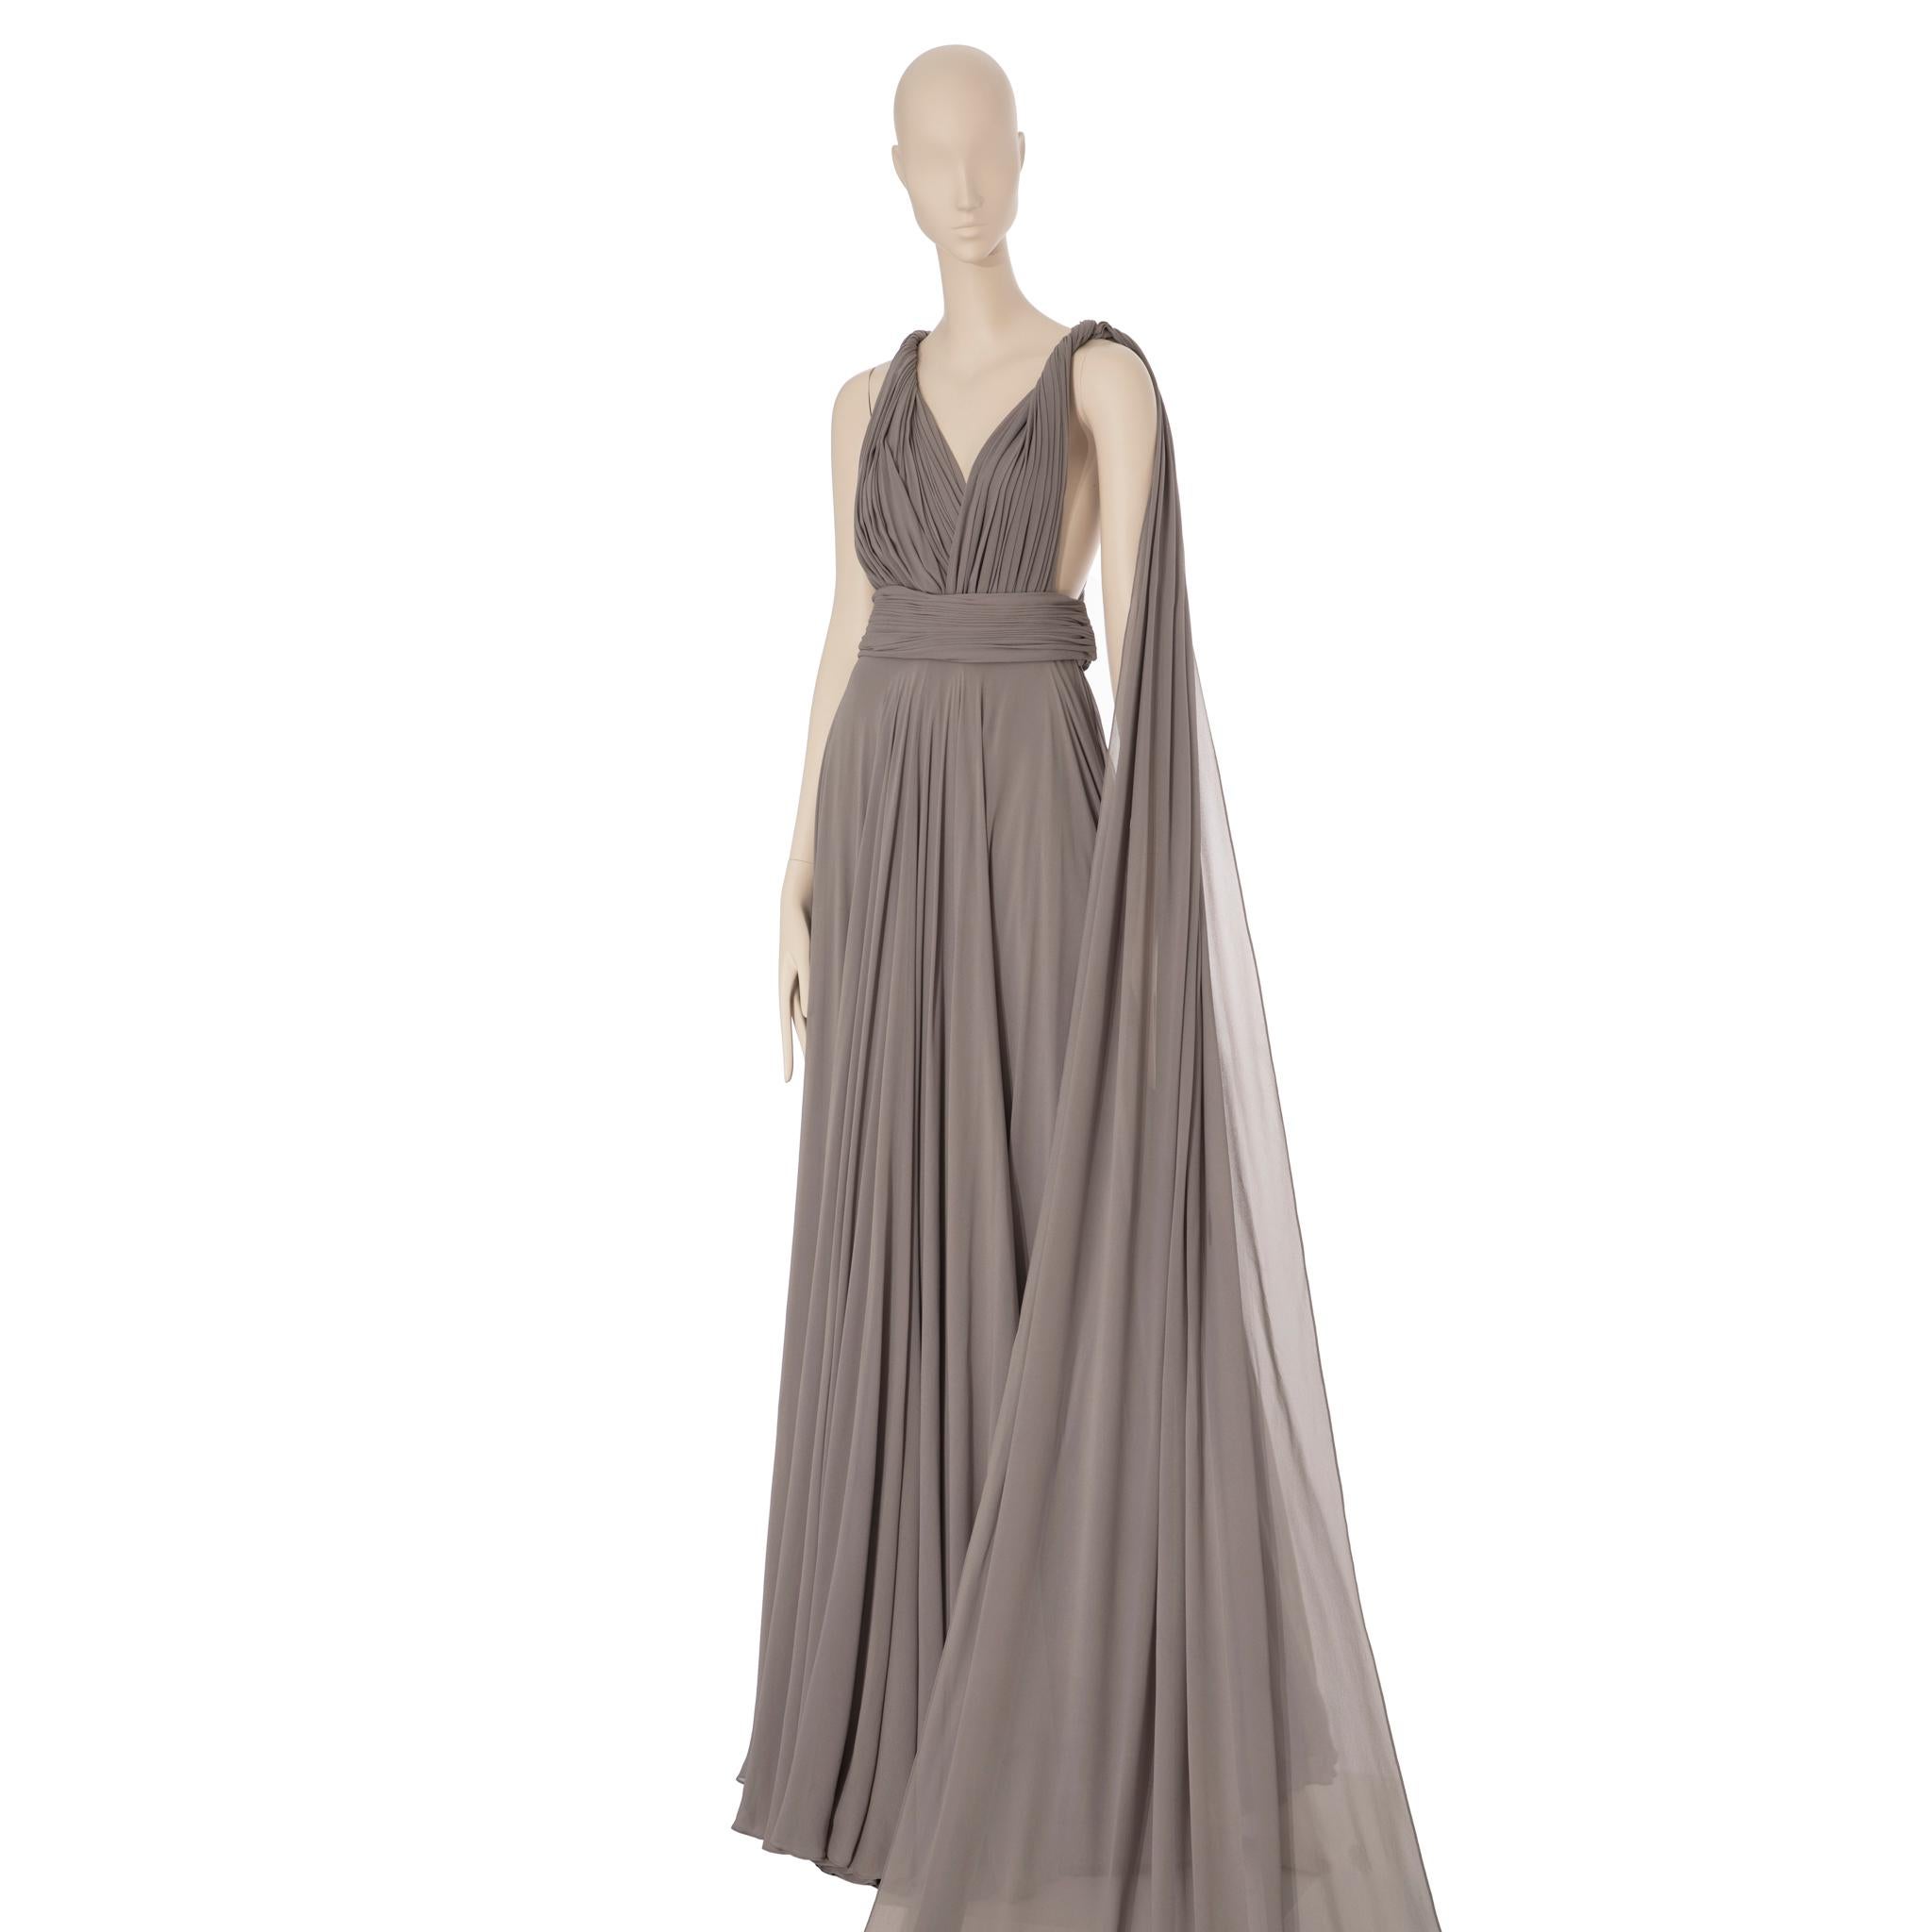 This stunning Yves Saint Laurent grey evening dress is designed from luxurious couture fabric for a timelessly elegant look. Crafted with precision and attention to detail, you can be sure this garment will turn heads. Ideal for special occasions,